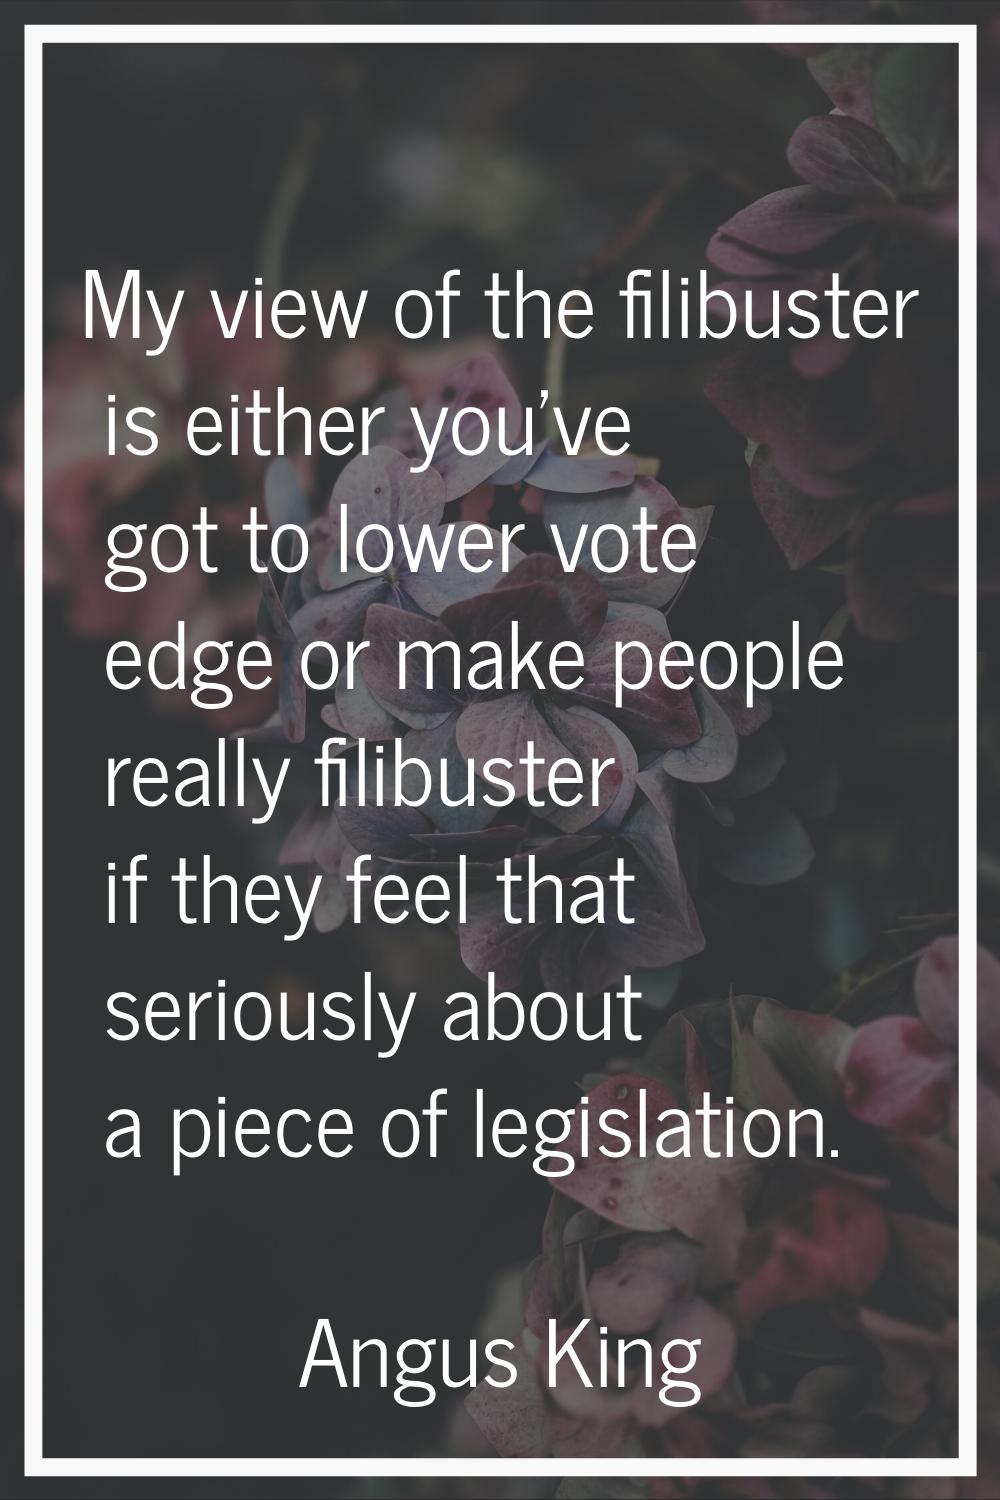 My view of the filibuster is either you've got to lower vote edge or make people really filibuster 